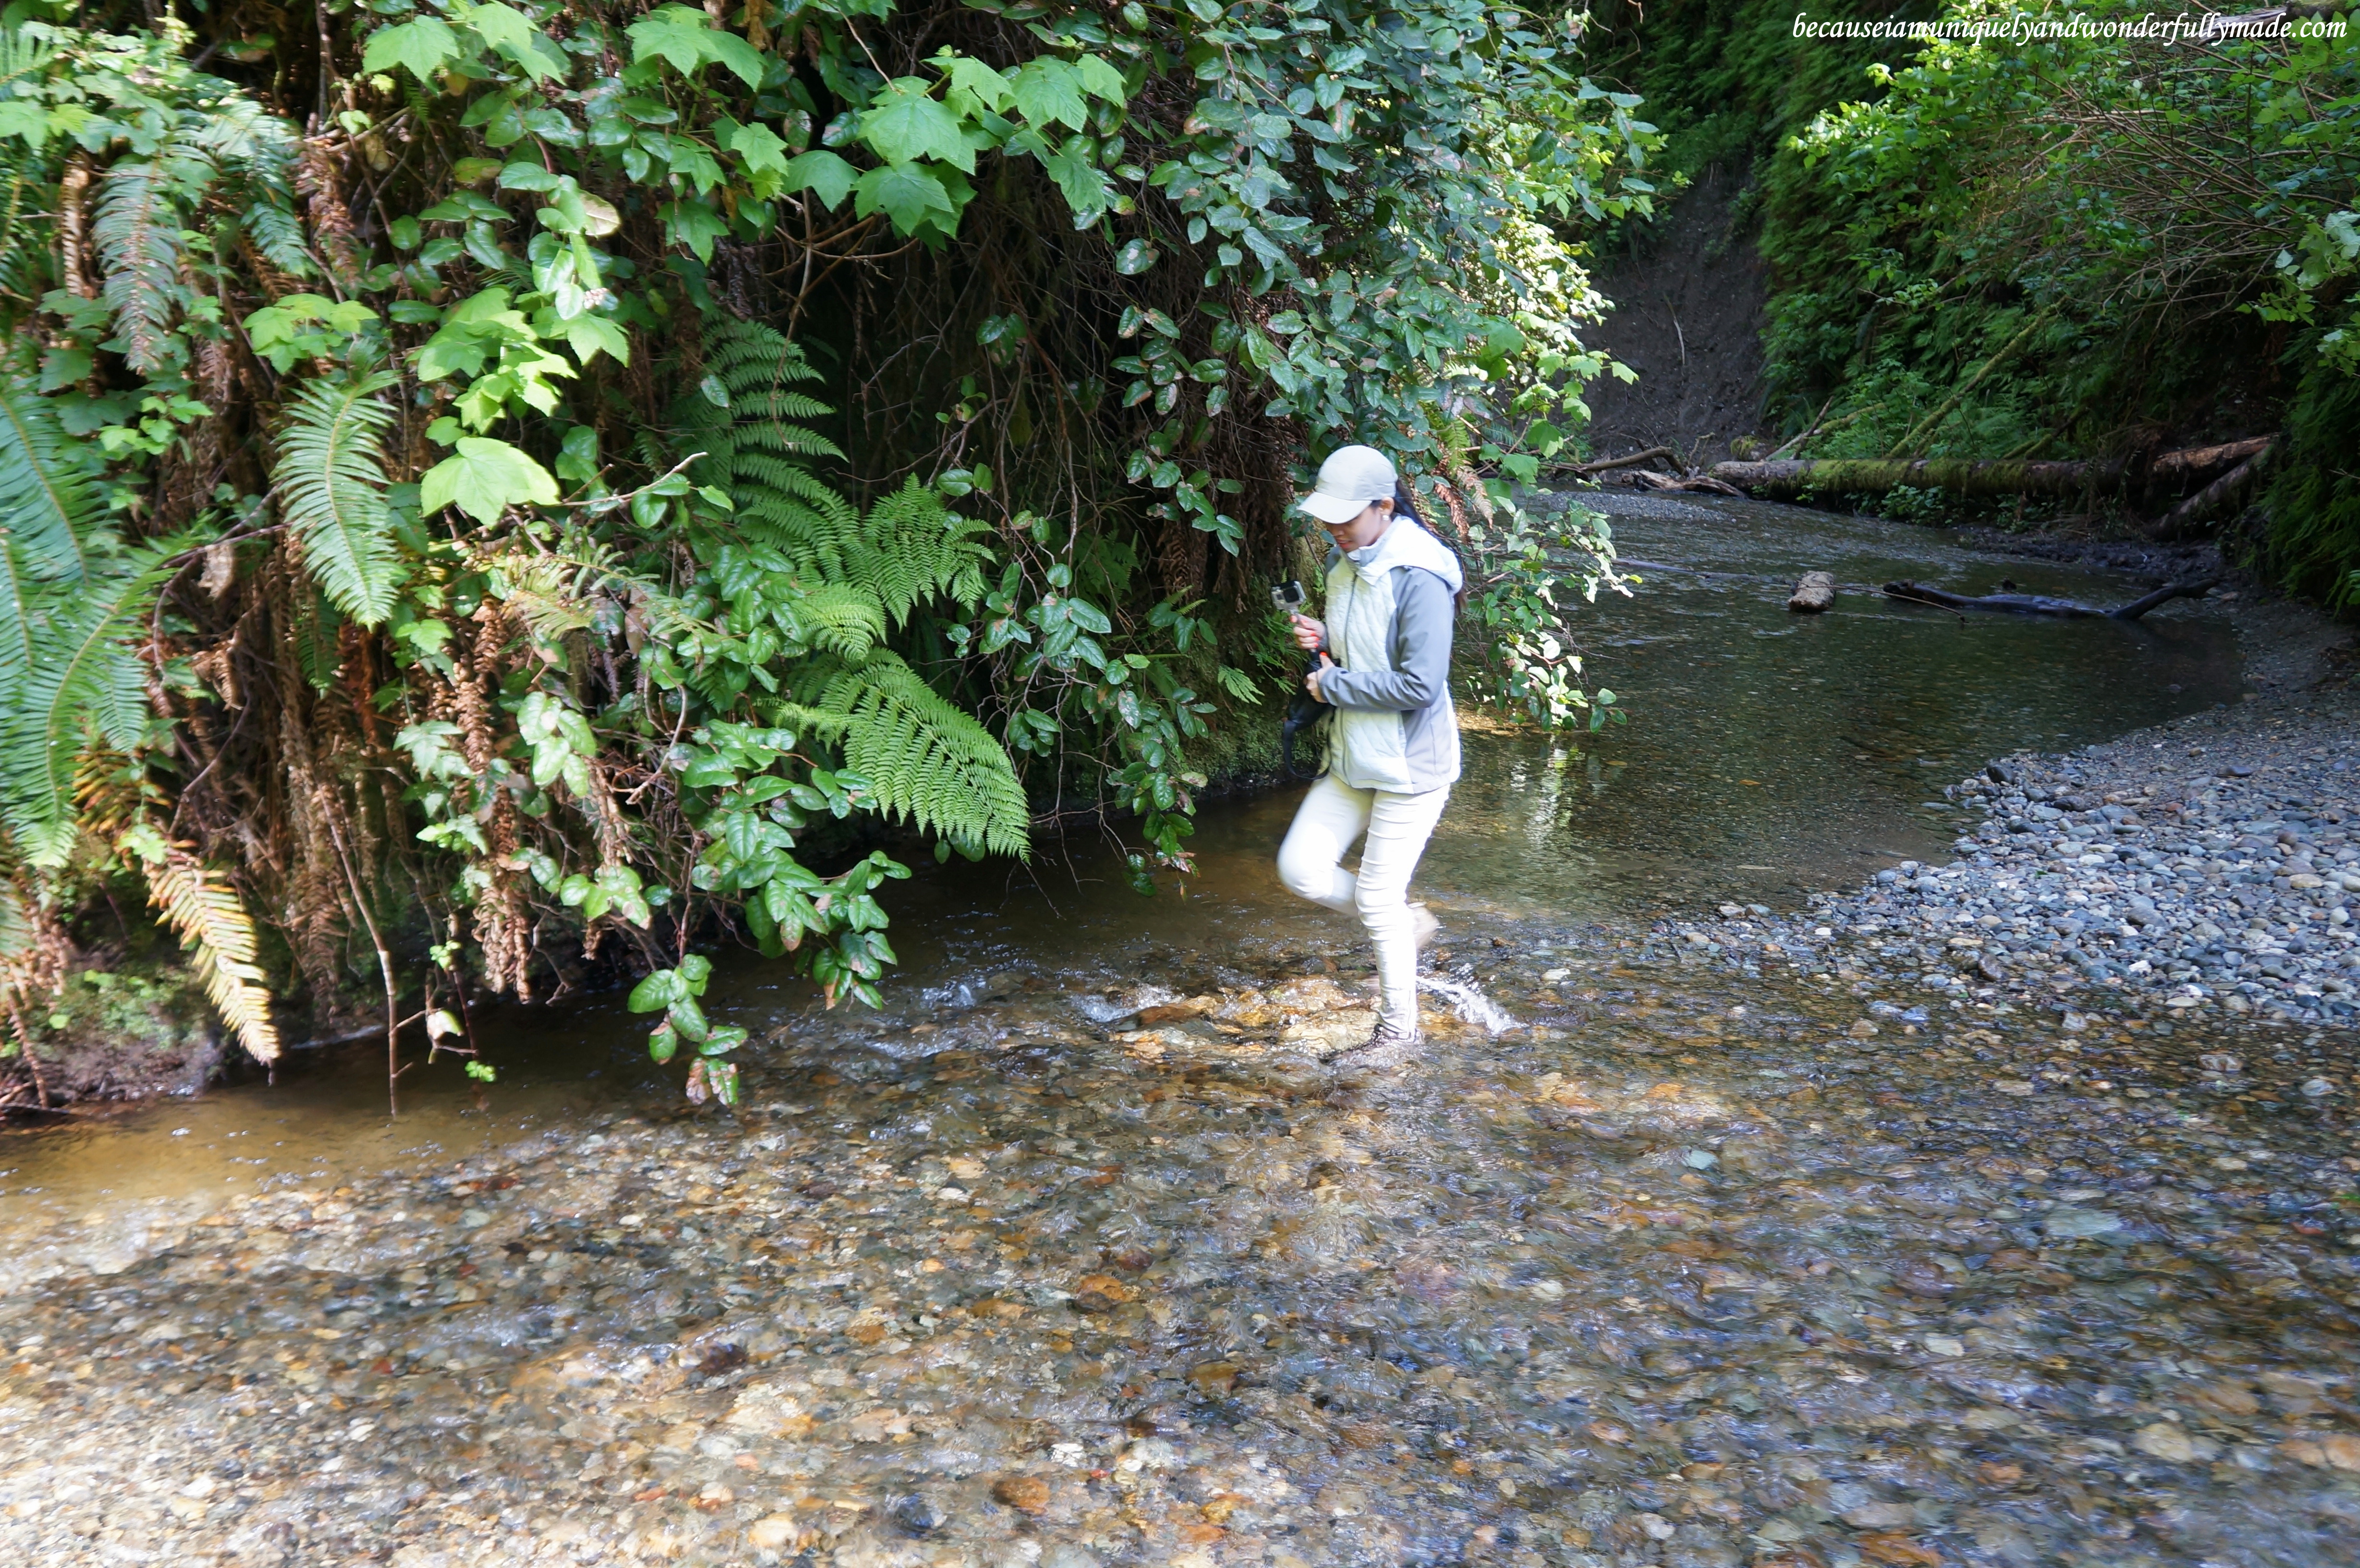 Fern Canyon Trail Loop requires a lot of wading through Home Creek waters. 